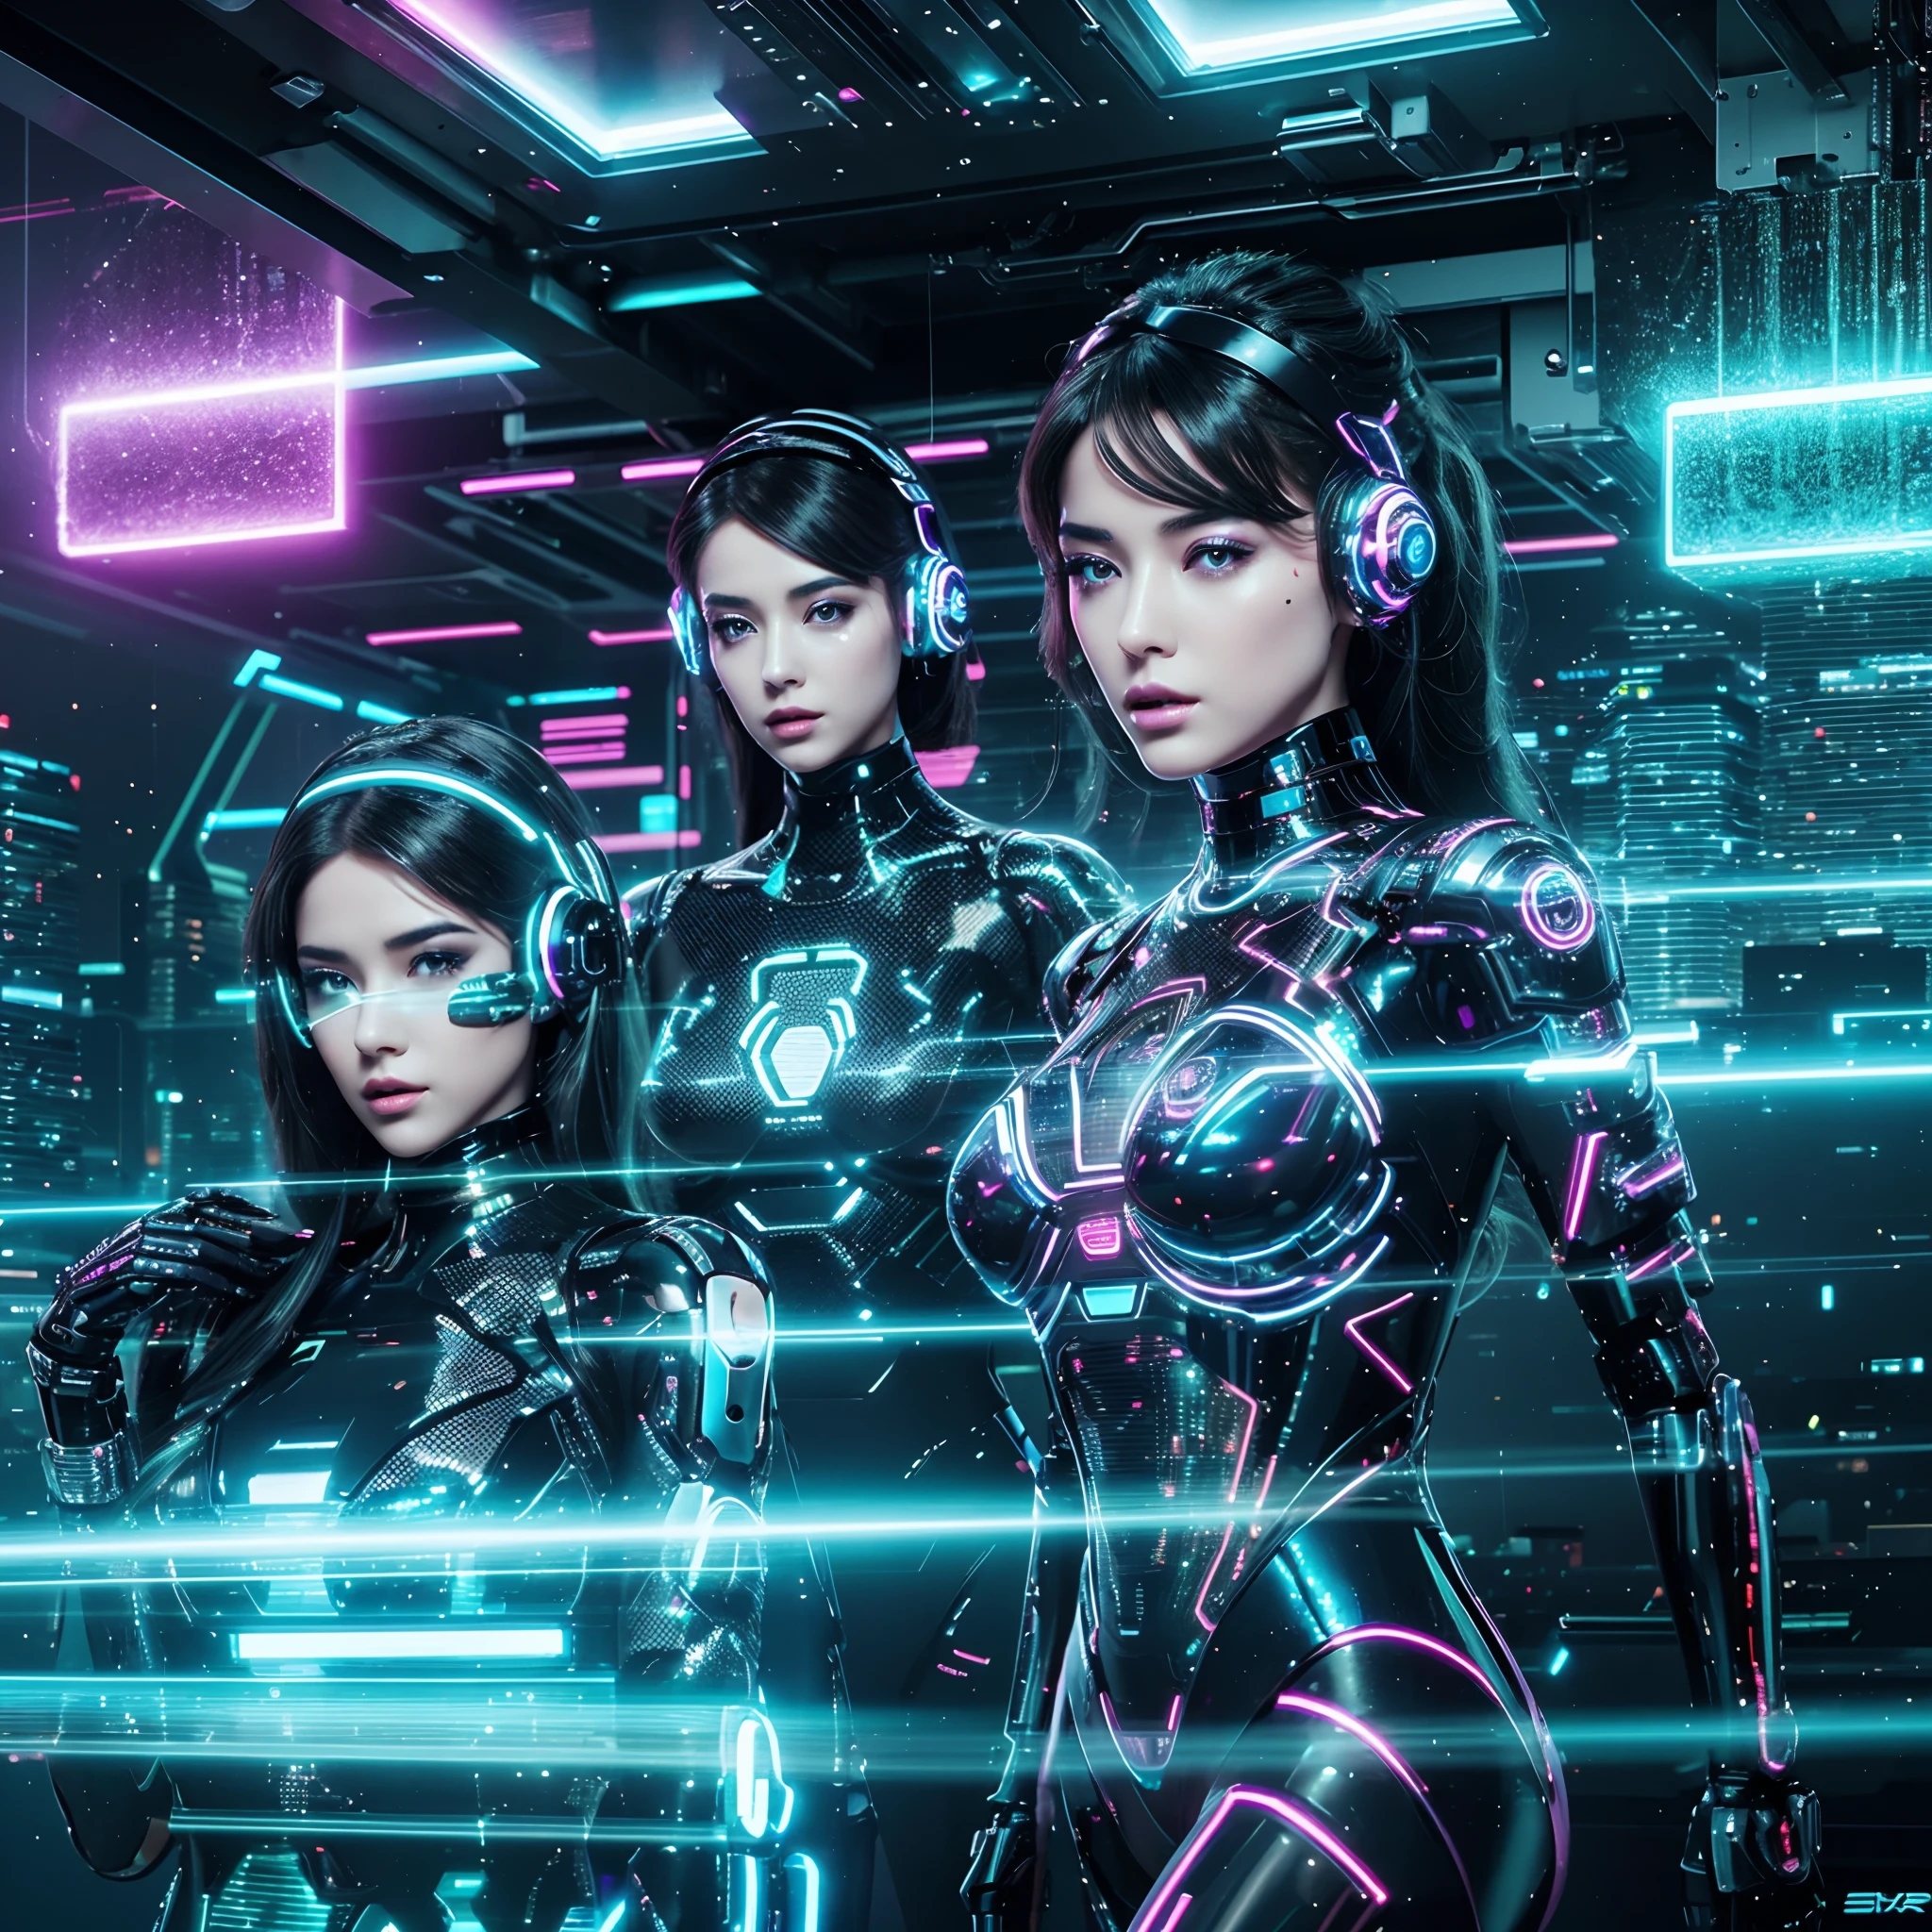 3 Sexy AI robot girls, Divas', wearing high-fashion glamour, with cybernetic body, neon-lit futuristic studio cityscape, striking dynamic poses that exude confidence. Incorporate circuitry patterns seamlessly into their elegant attire, and accentuate their faces with a subtle holographic glow, glitch effects, technology and glamour.